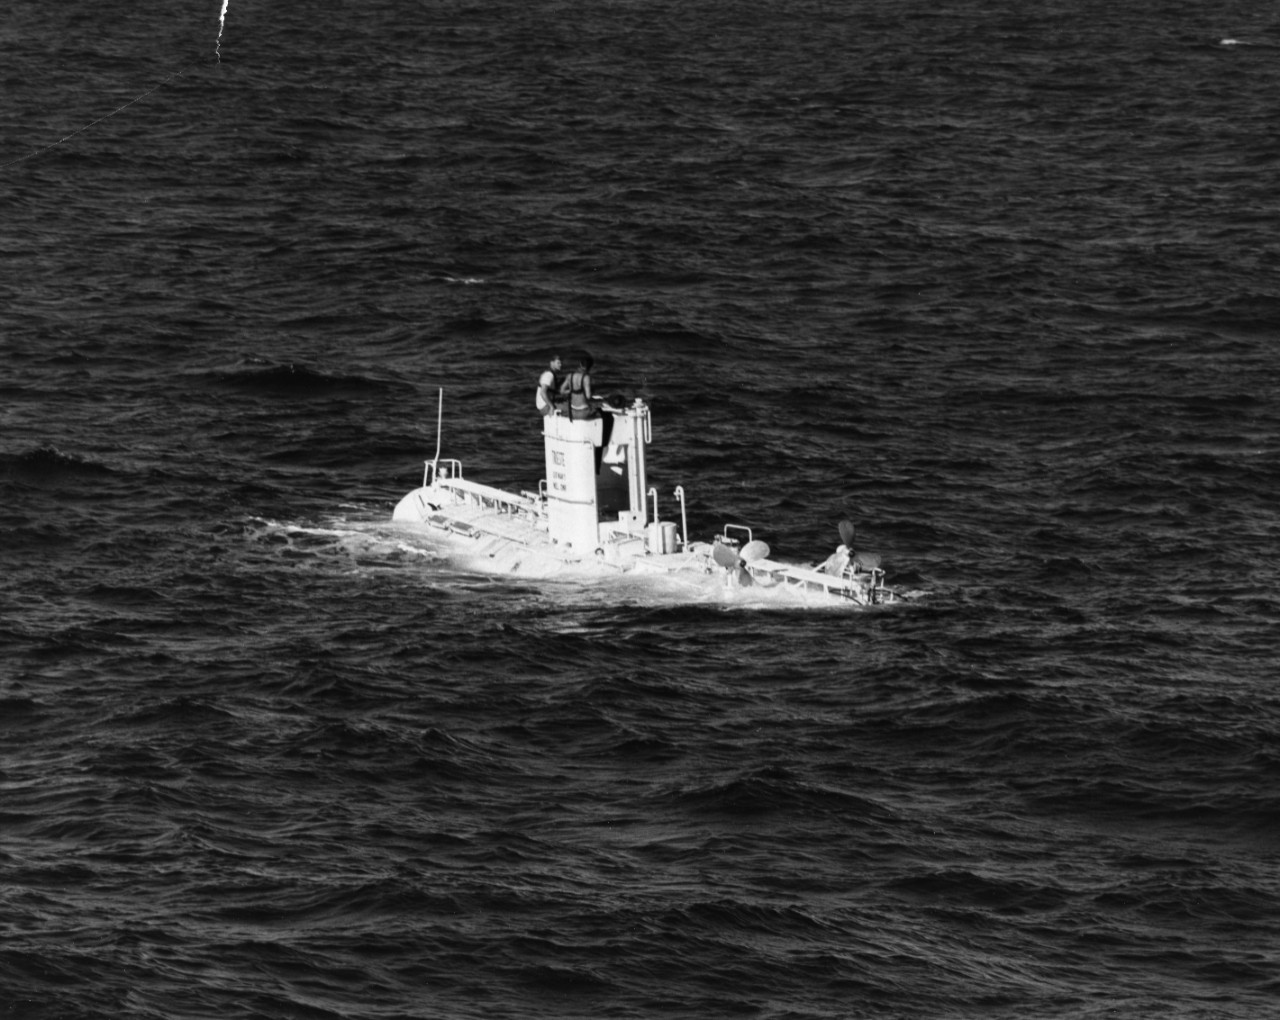 Bathyscaphe Trieste after her dive at 18,600 feet. On the conning tower are Dr. Andrea B. Rechnitzer (left) and Jacques Piccard, the two men who were at the controls.